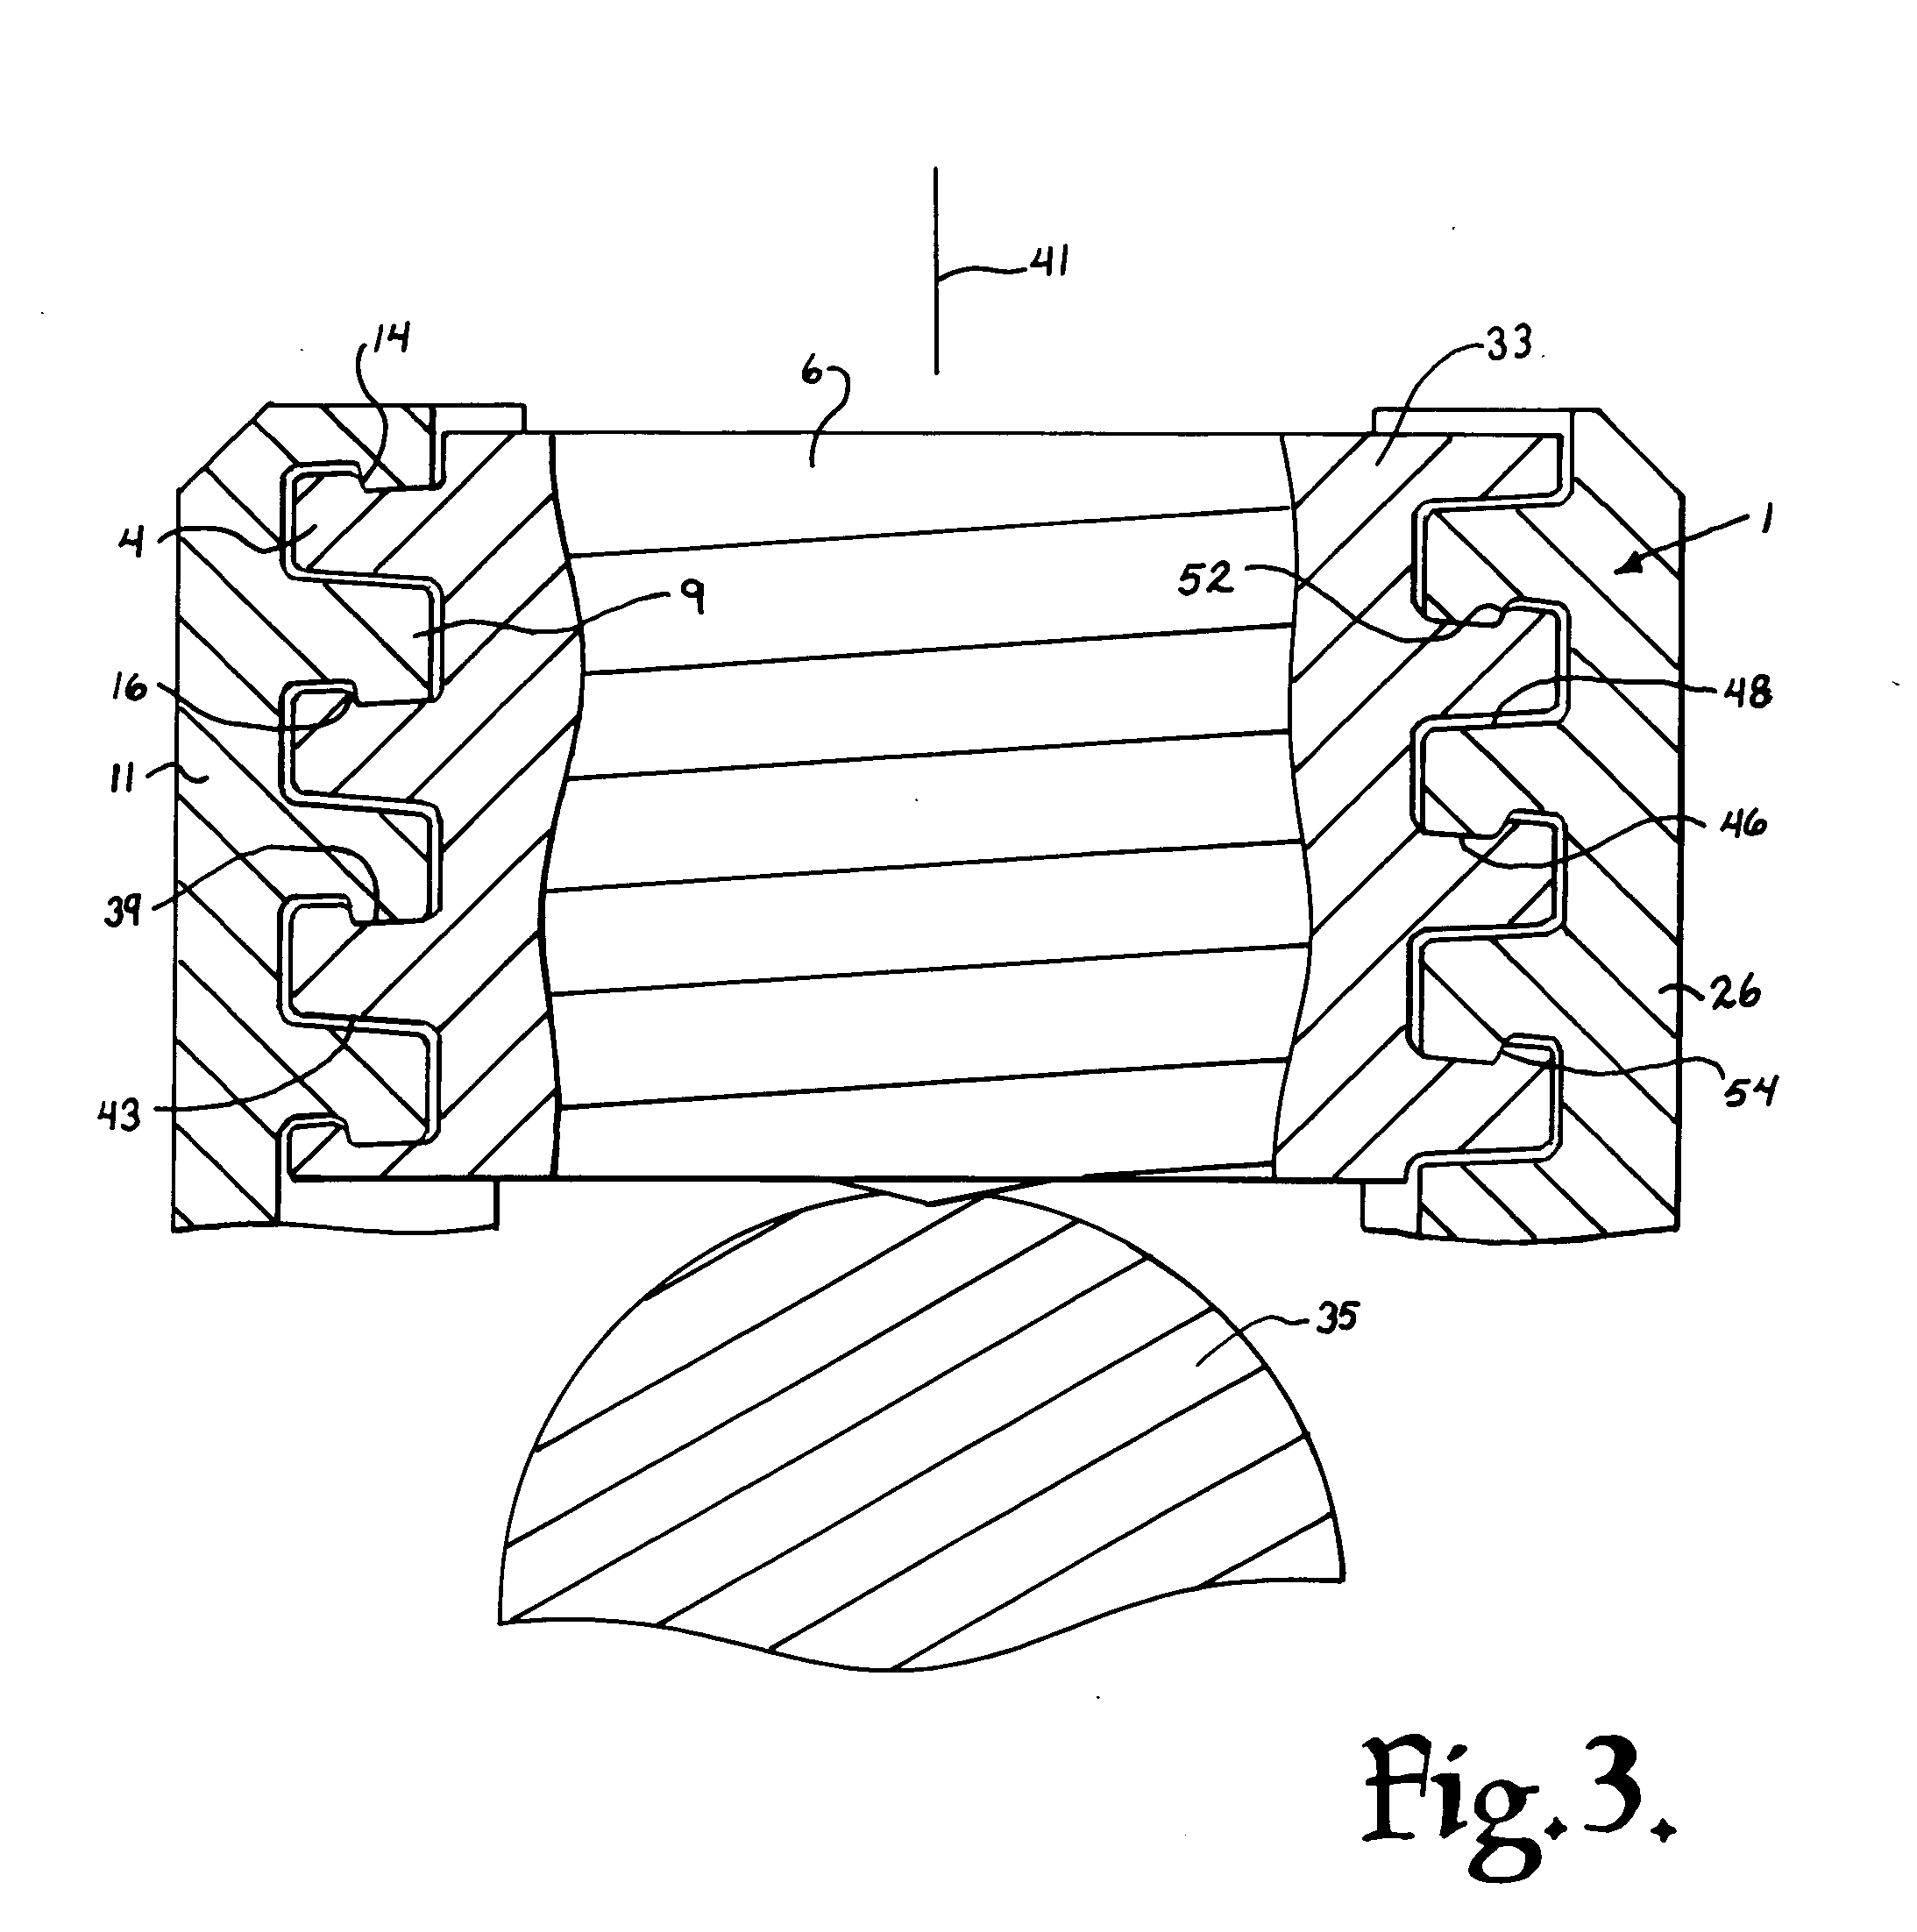 Helical guide and advancement flange with radially loaded lip